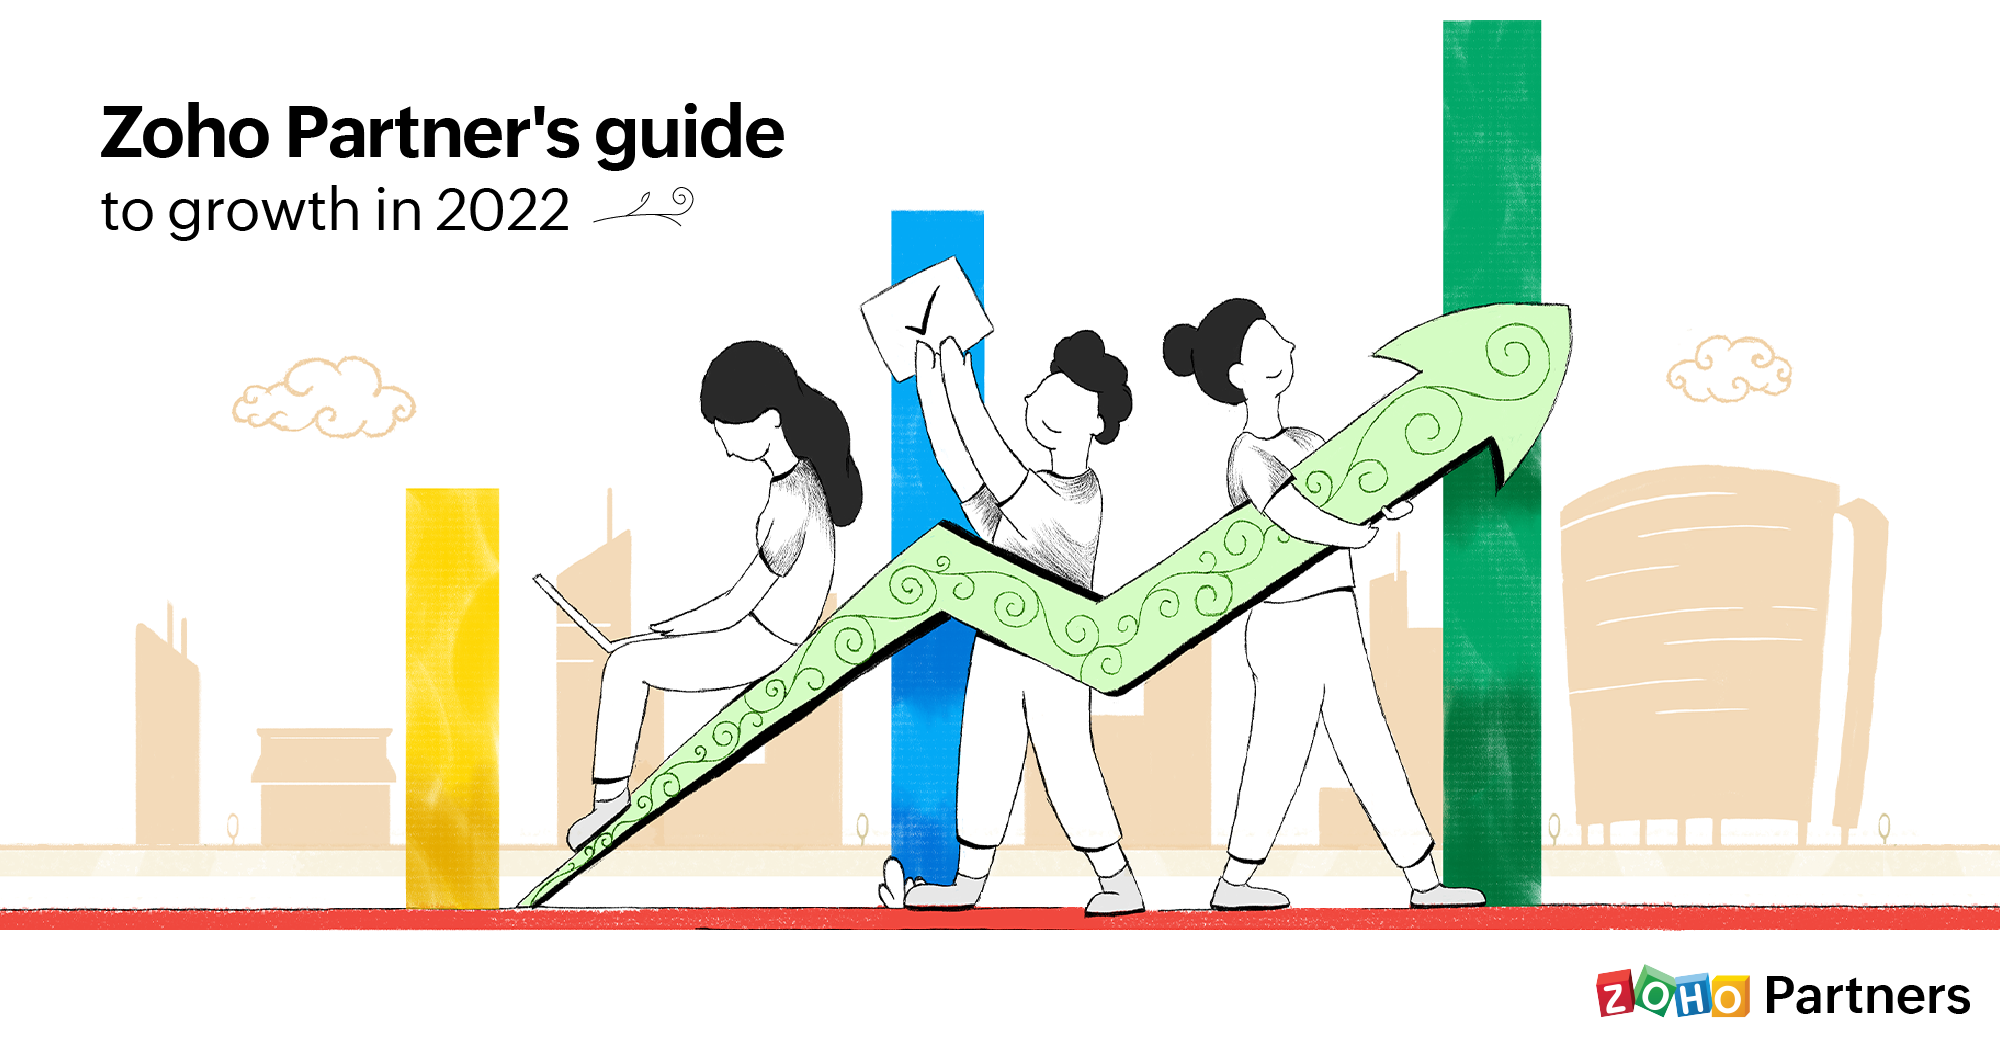 Image showing the growth of Zoho and its Partners in 2022.